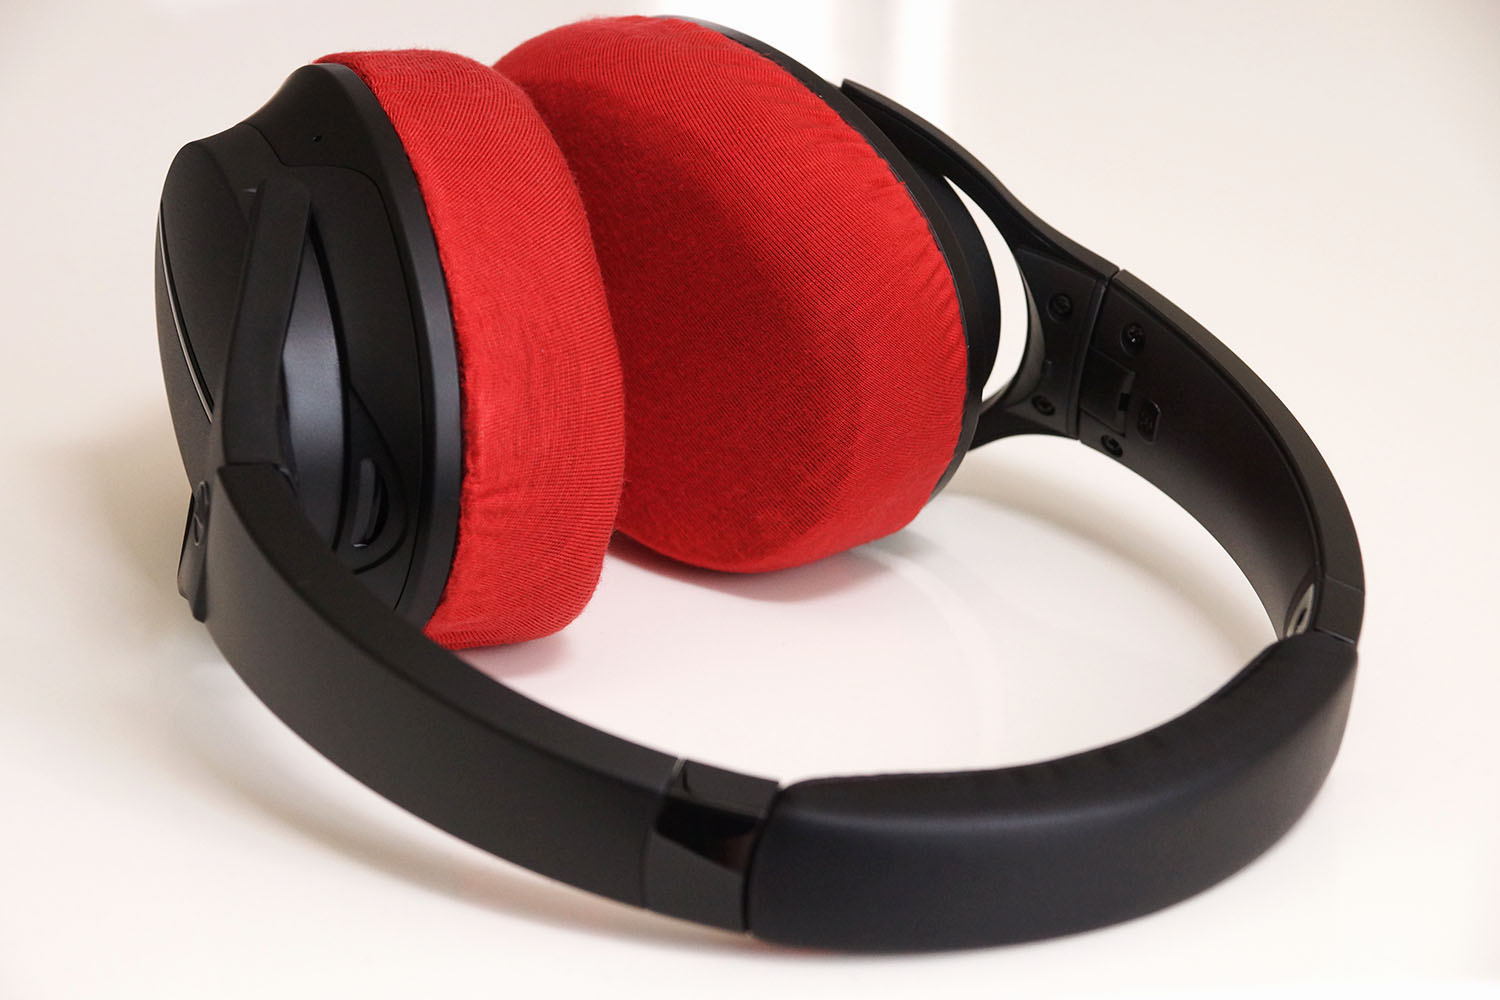 audio-technica ATH-DWL550 ear pads compatible with mimimamo